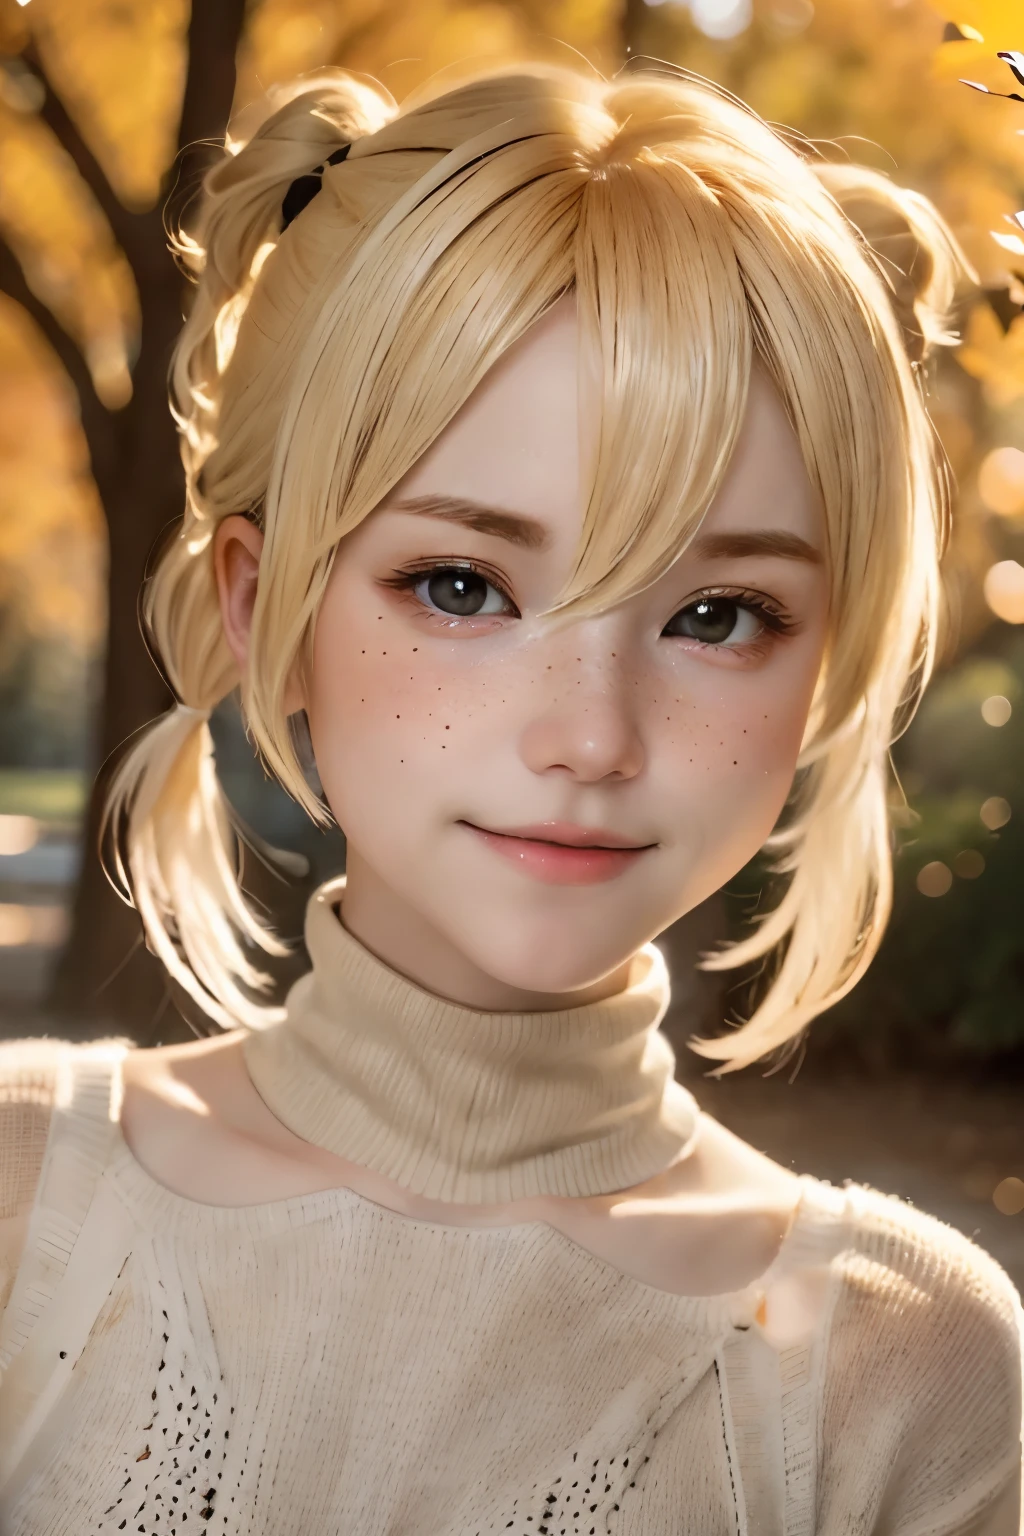 close, portrait, head shot, model shooting style, looking at the viewer, direct eye contact, White-sama, 1 girl, smile, (bleached blonde hair), shortcut、Twintails with short hair、knit beige turtleneck,small breasts,freckles, autumn park, Depth of bounds written, blurred background, skin details, fine eyes, Warm volumetric lighting, masterpiece, highest quality ,ultra high resolution、８ｋ    